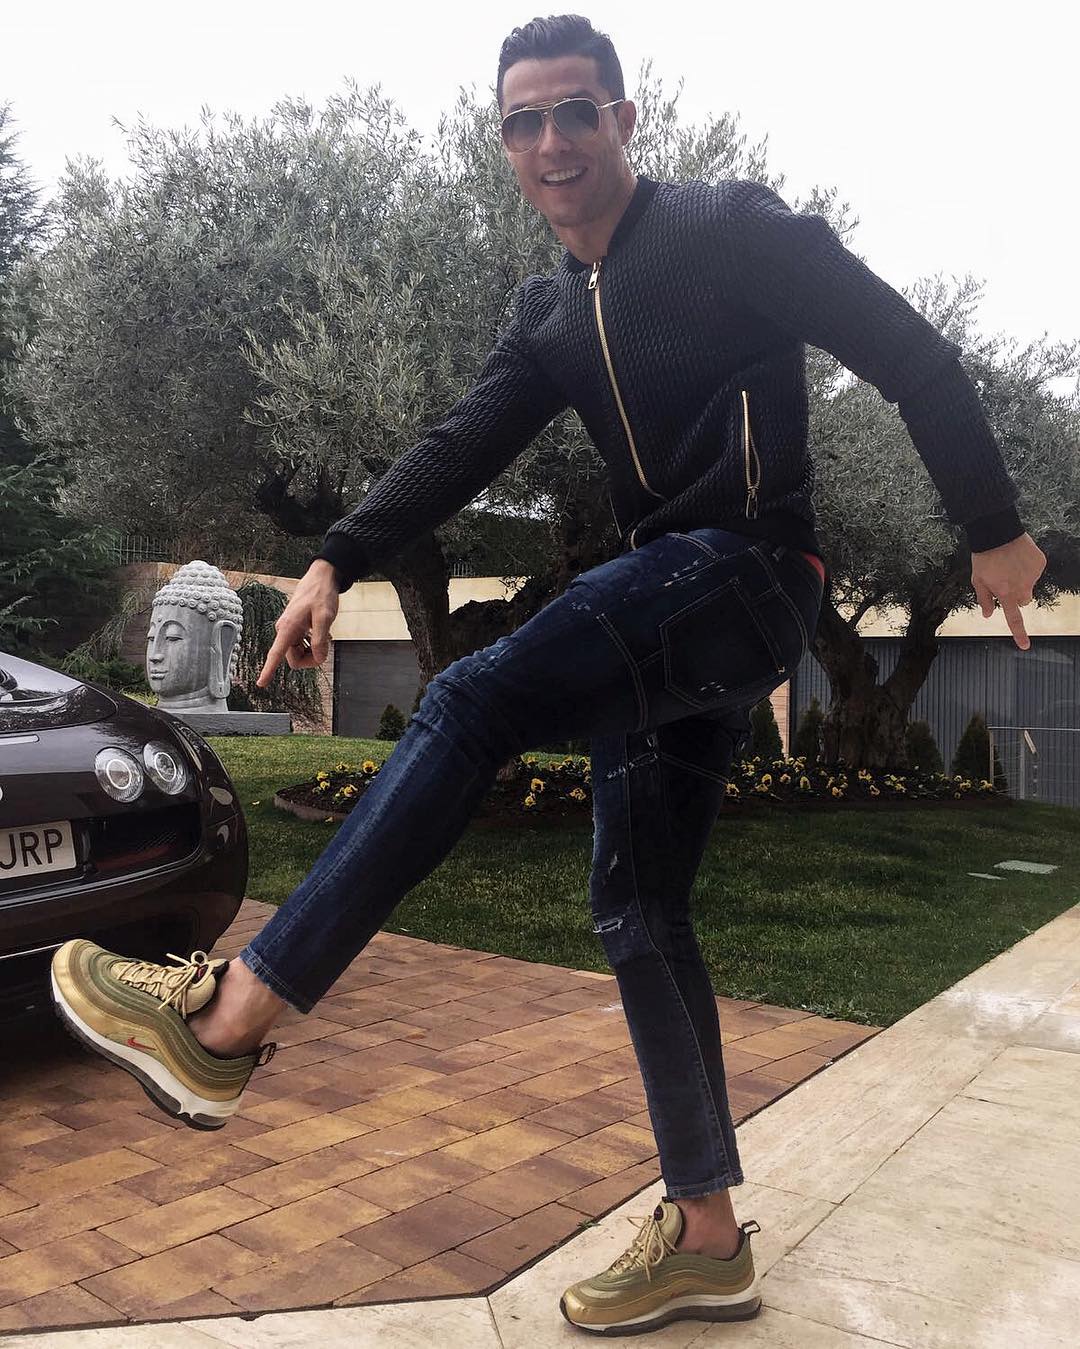 af ægtemand lærred SPOTTED: Cristian Ronaldo In Dolce & Gabbana Jacket And Nike Air Max 97  Sneakers – PAUSE Online | Men's Fashion, Street Style, Fashion News &  Streetwear